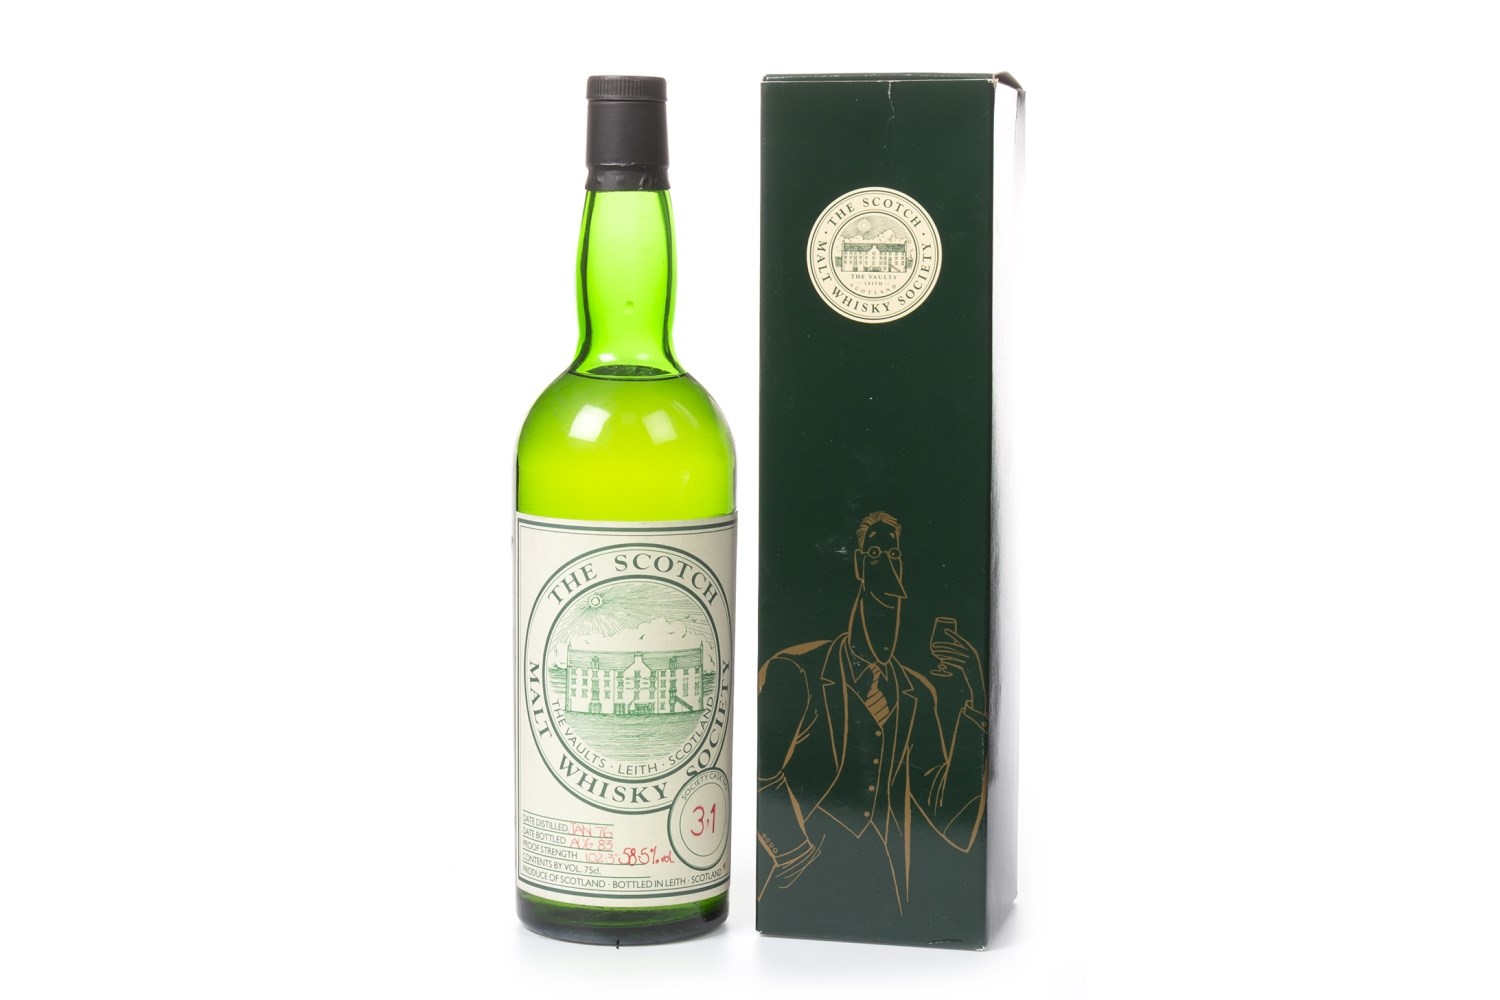 BOWMORE 1976 SMWS 3.1 AGED 6 YEARS